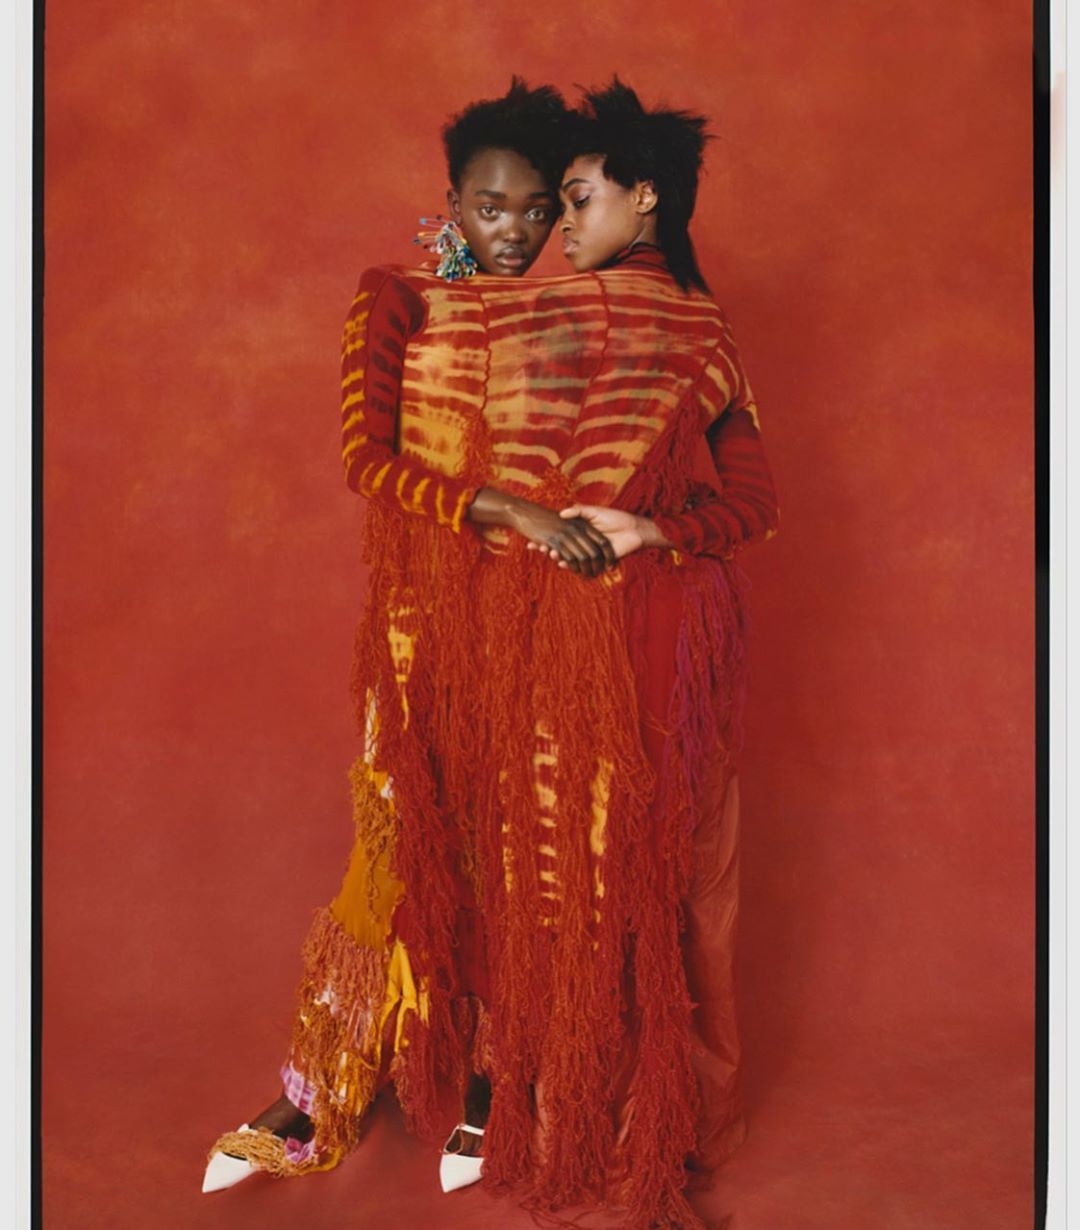 ESSENCE Best In Black Fashion Awards: Meet The 2019 Photographer of the Year Nominees